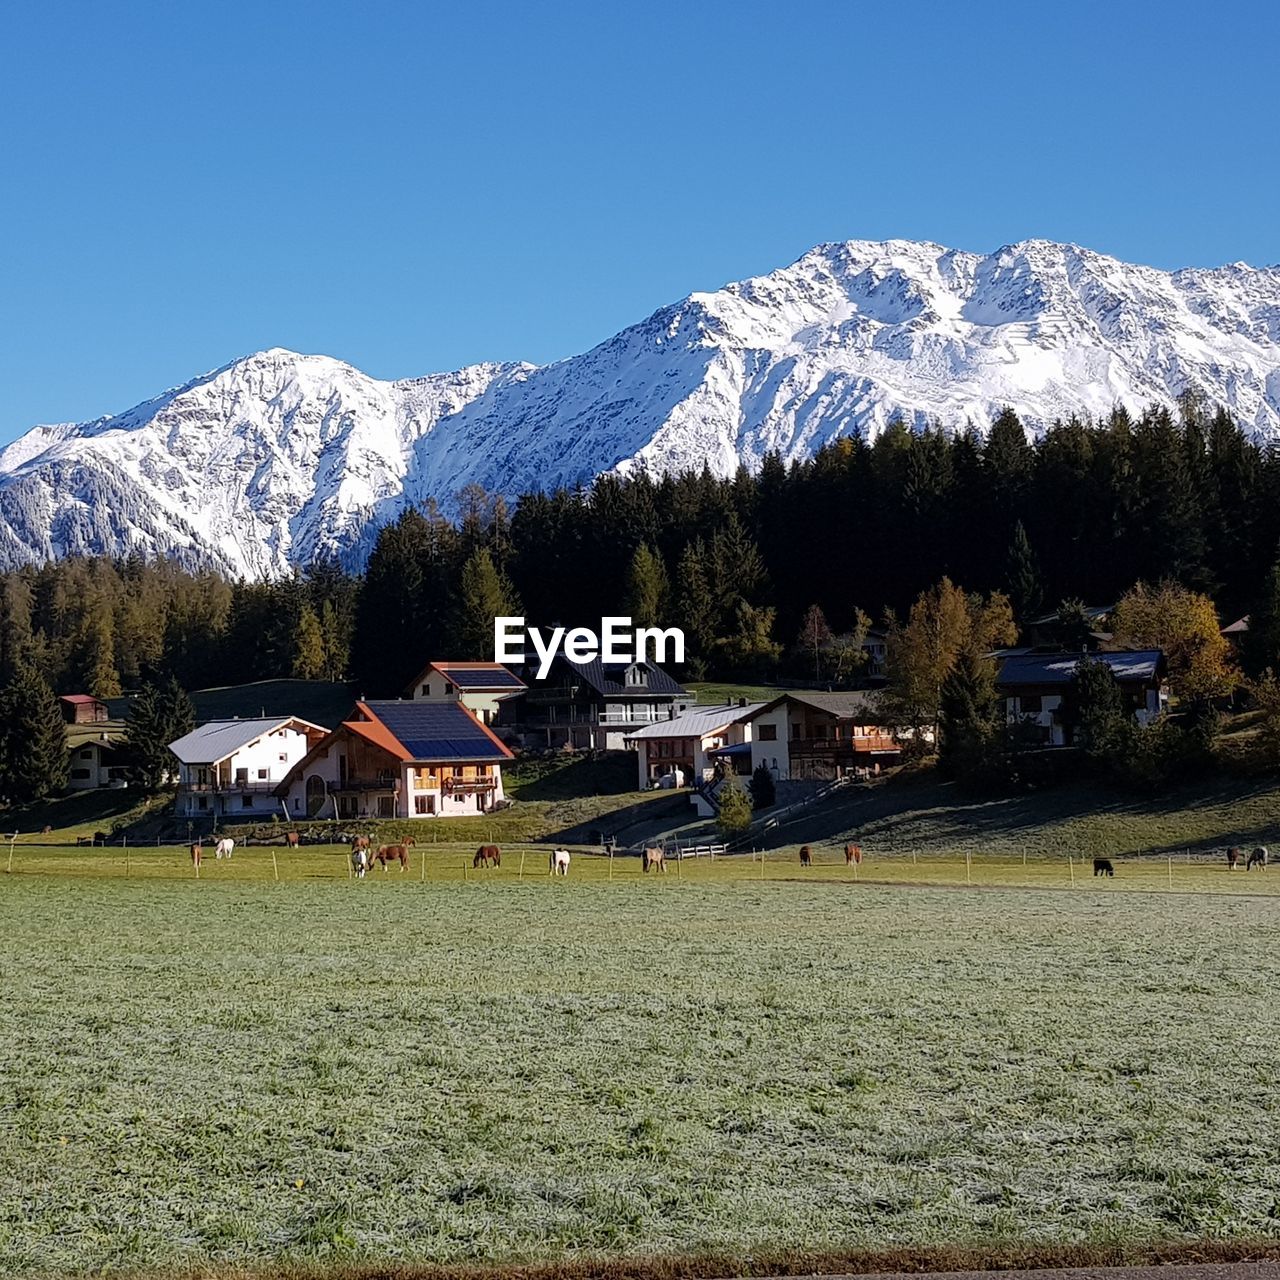 HOUSES ON FIELD AGAINST SNOWCAPPED MOUNTAINS